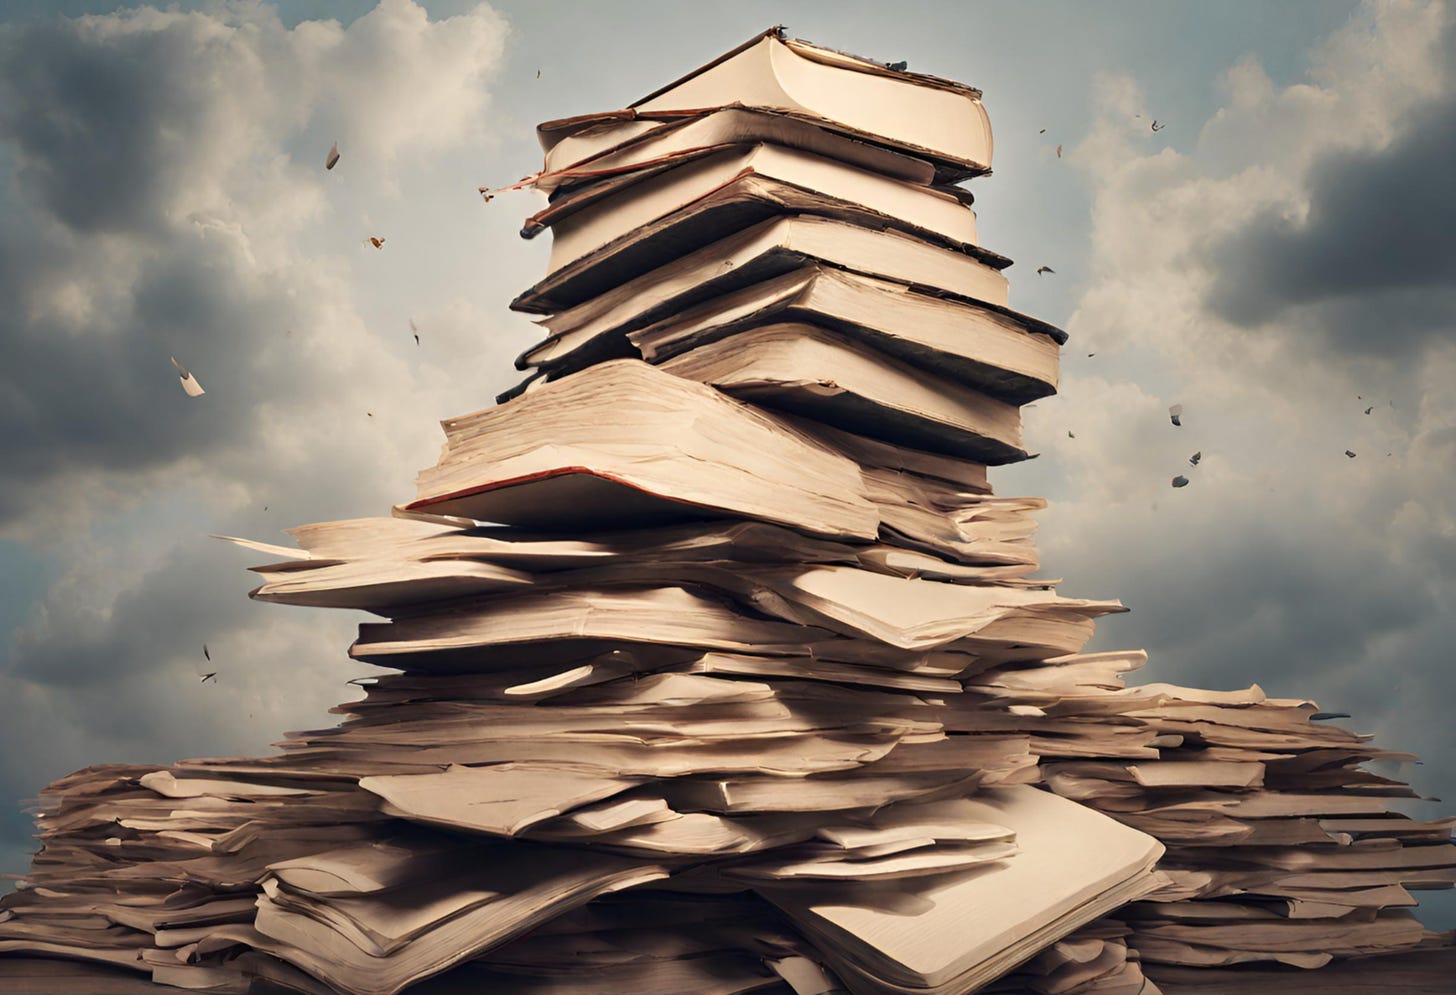 "A stack of manuscripts towers to the sky"